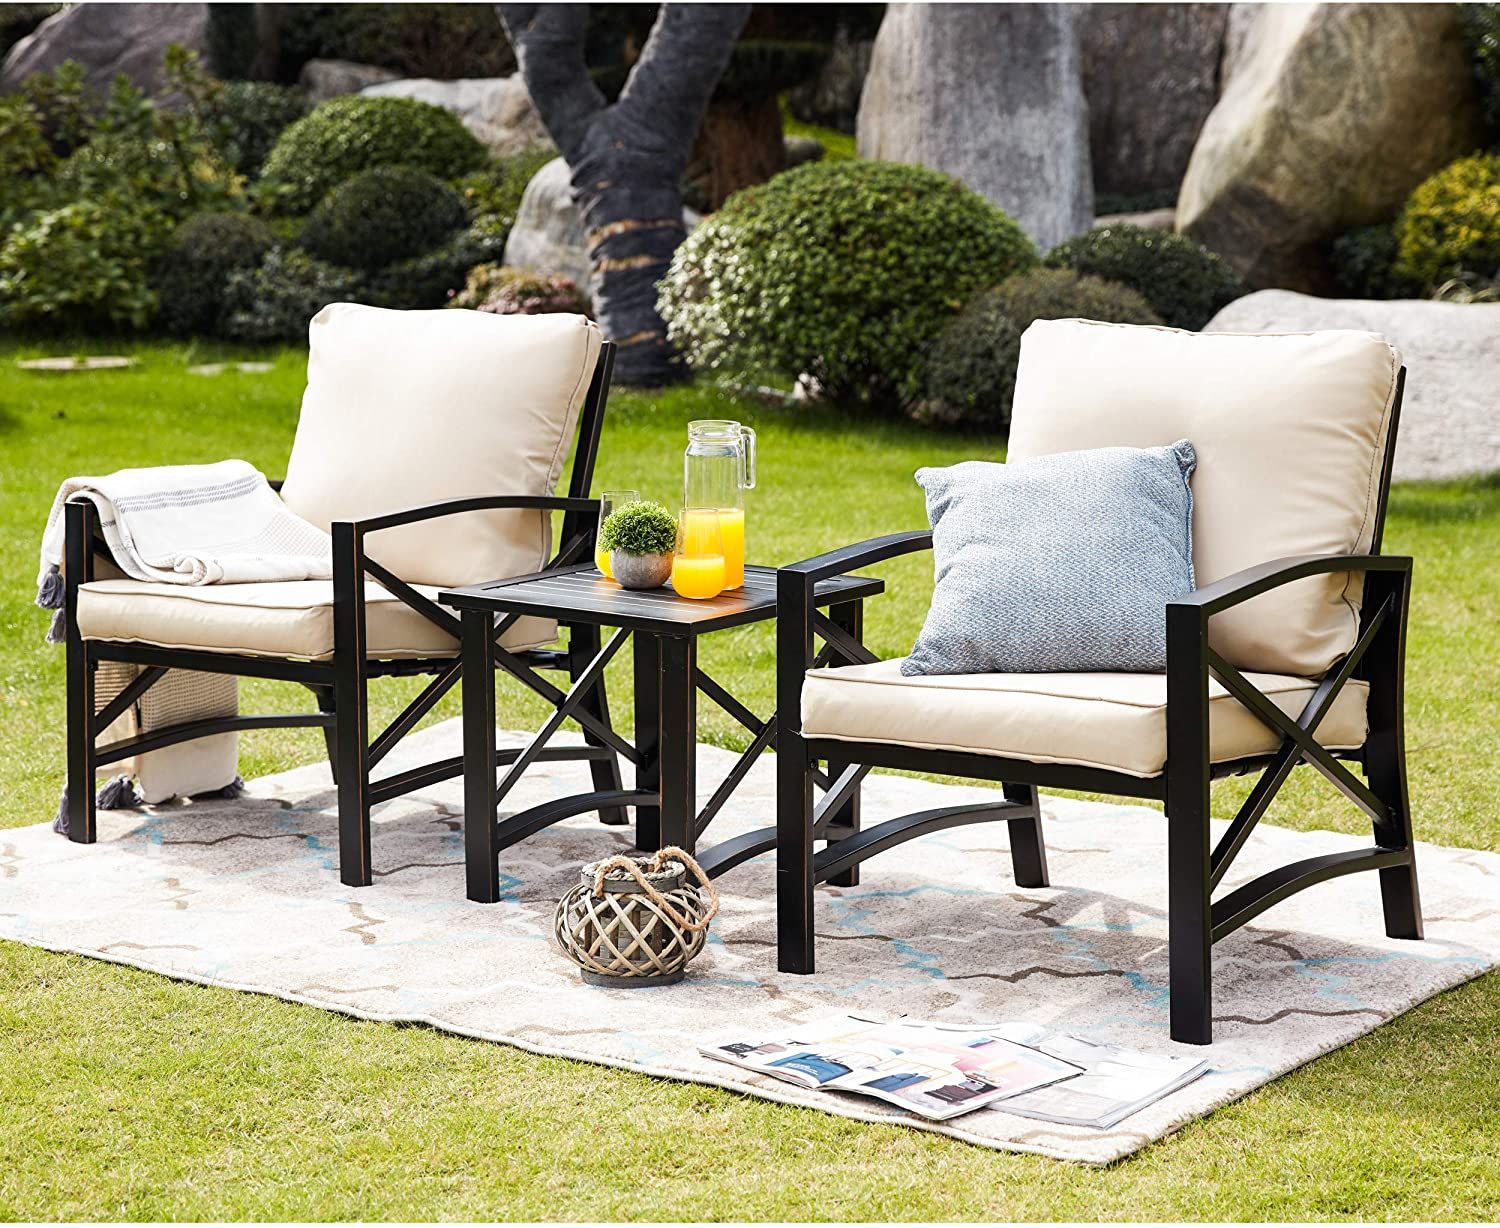 8 Best Patio Furniture Sets 2021 The, What Outdoor Furniture Holds Up The Best